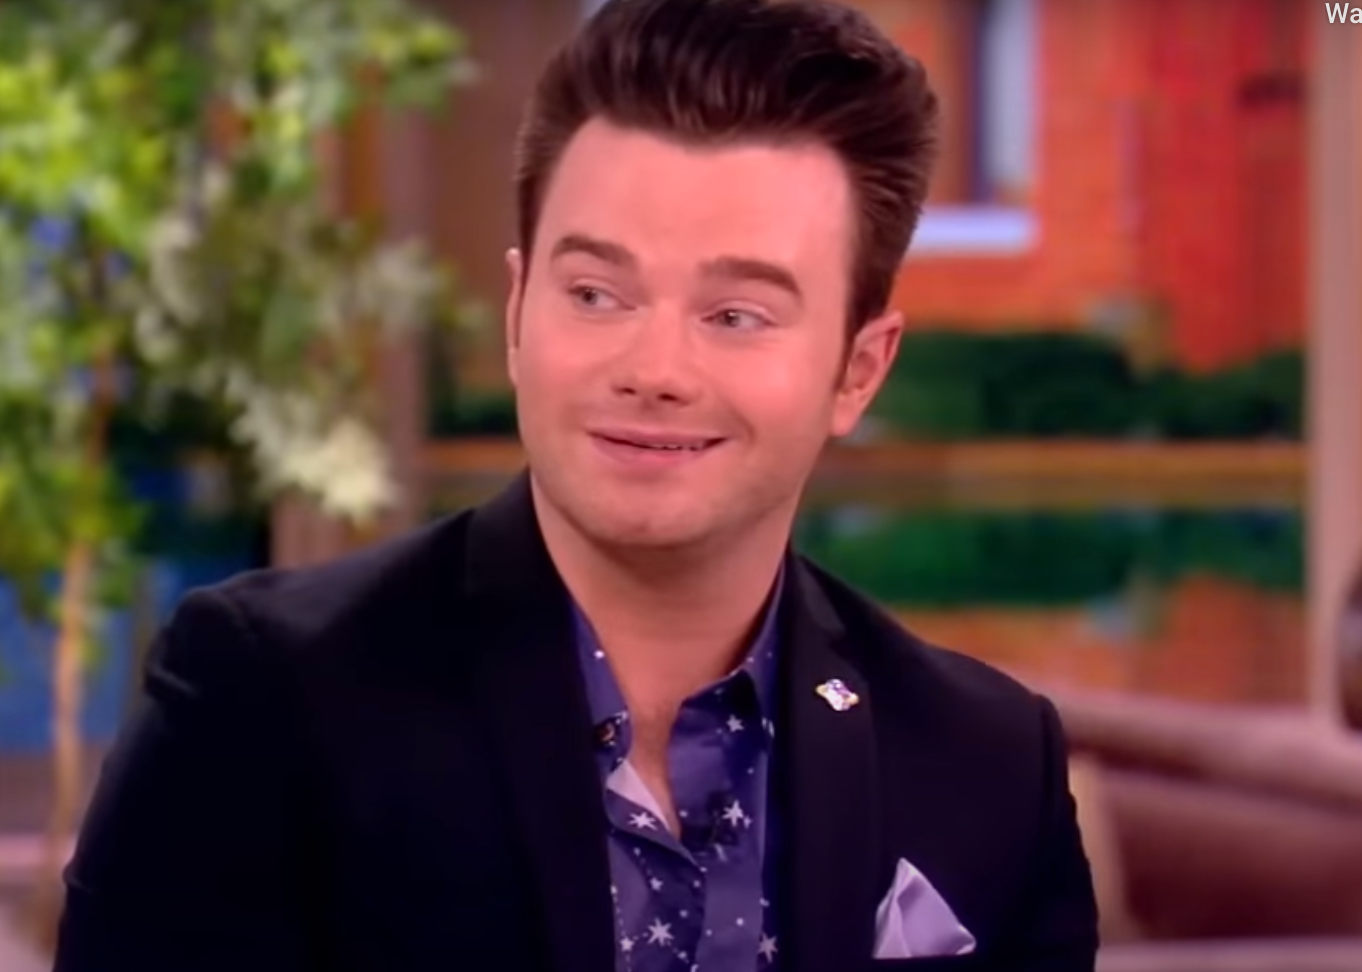 Chris Colfer played a gay teen in &#8220;Glee&#8221; but was warned coming out would &#8220;ruin&#8221; his career